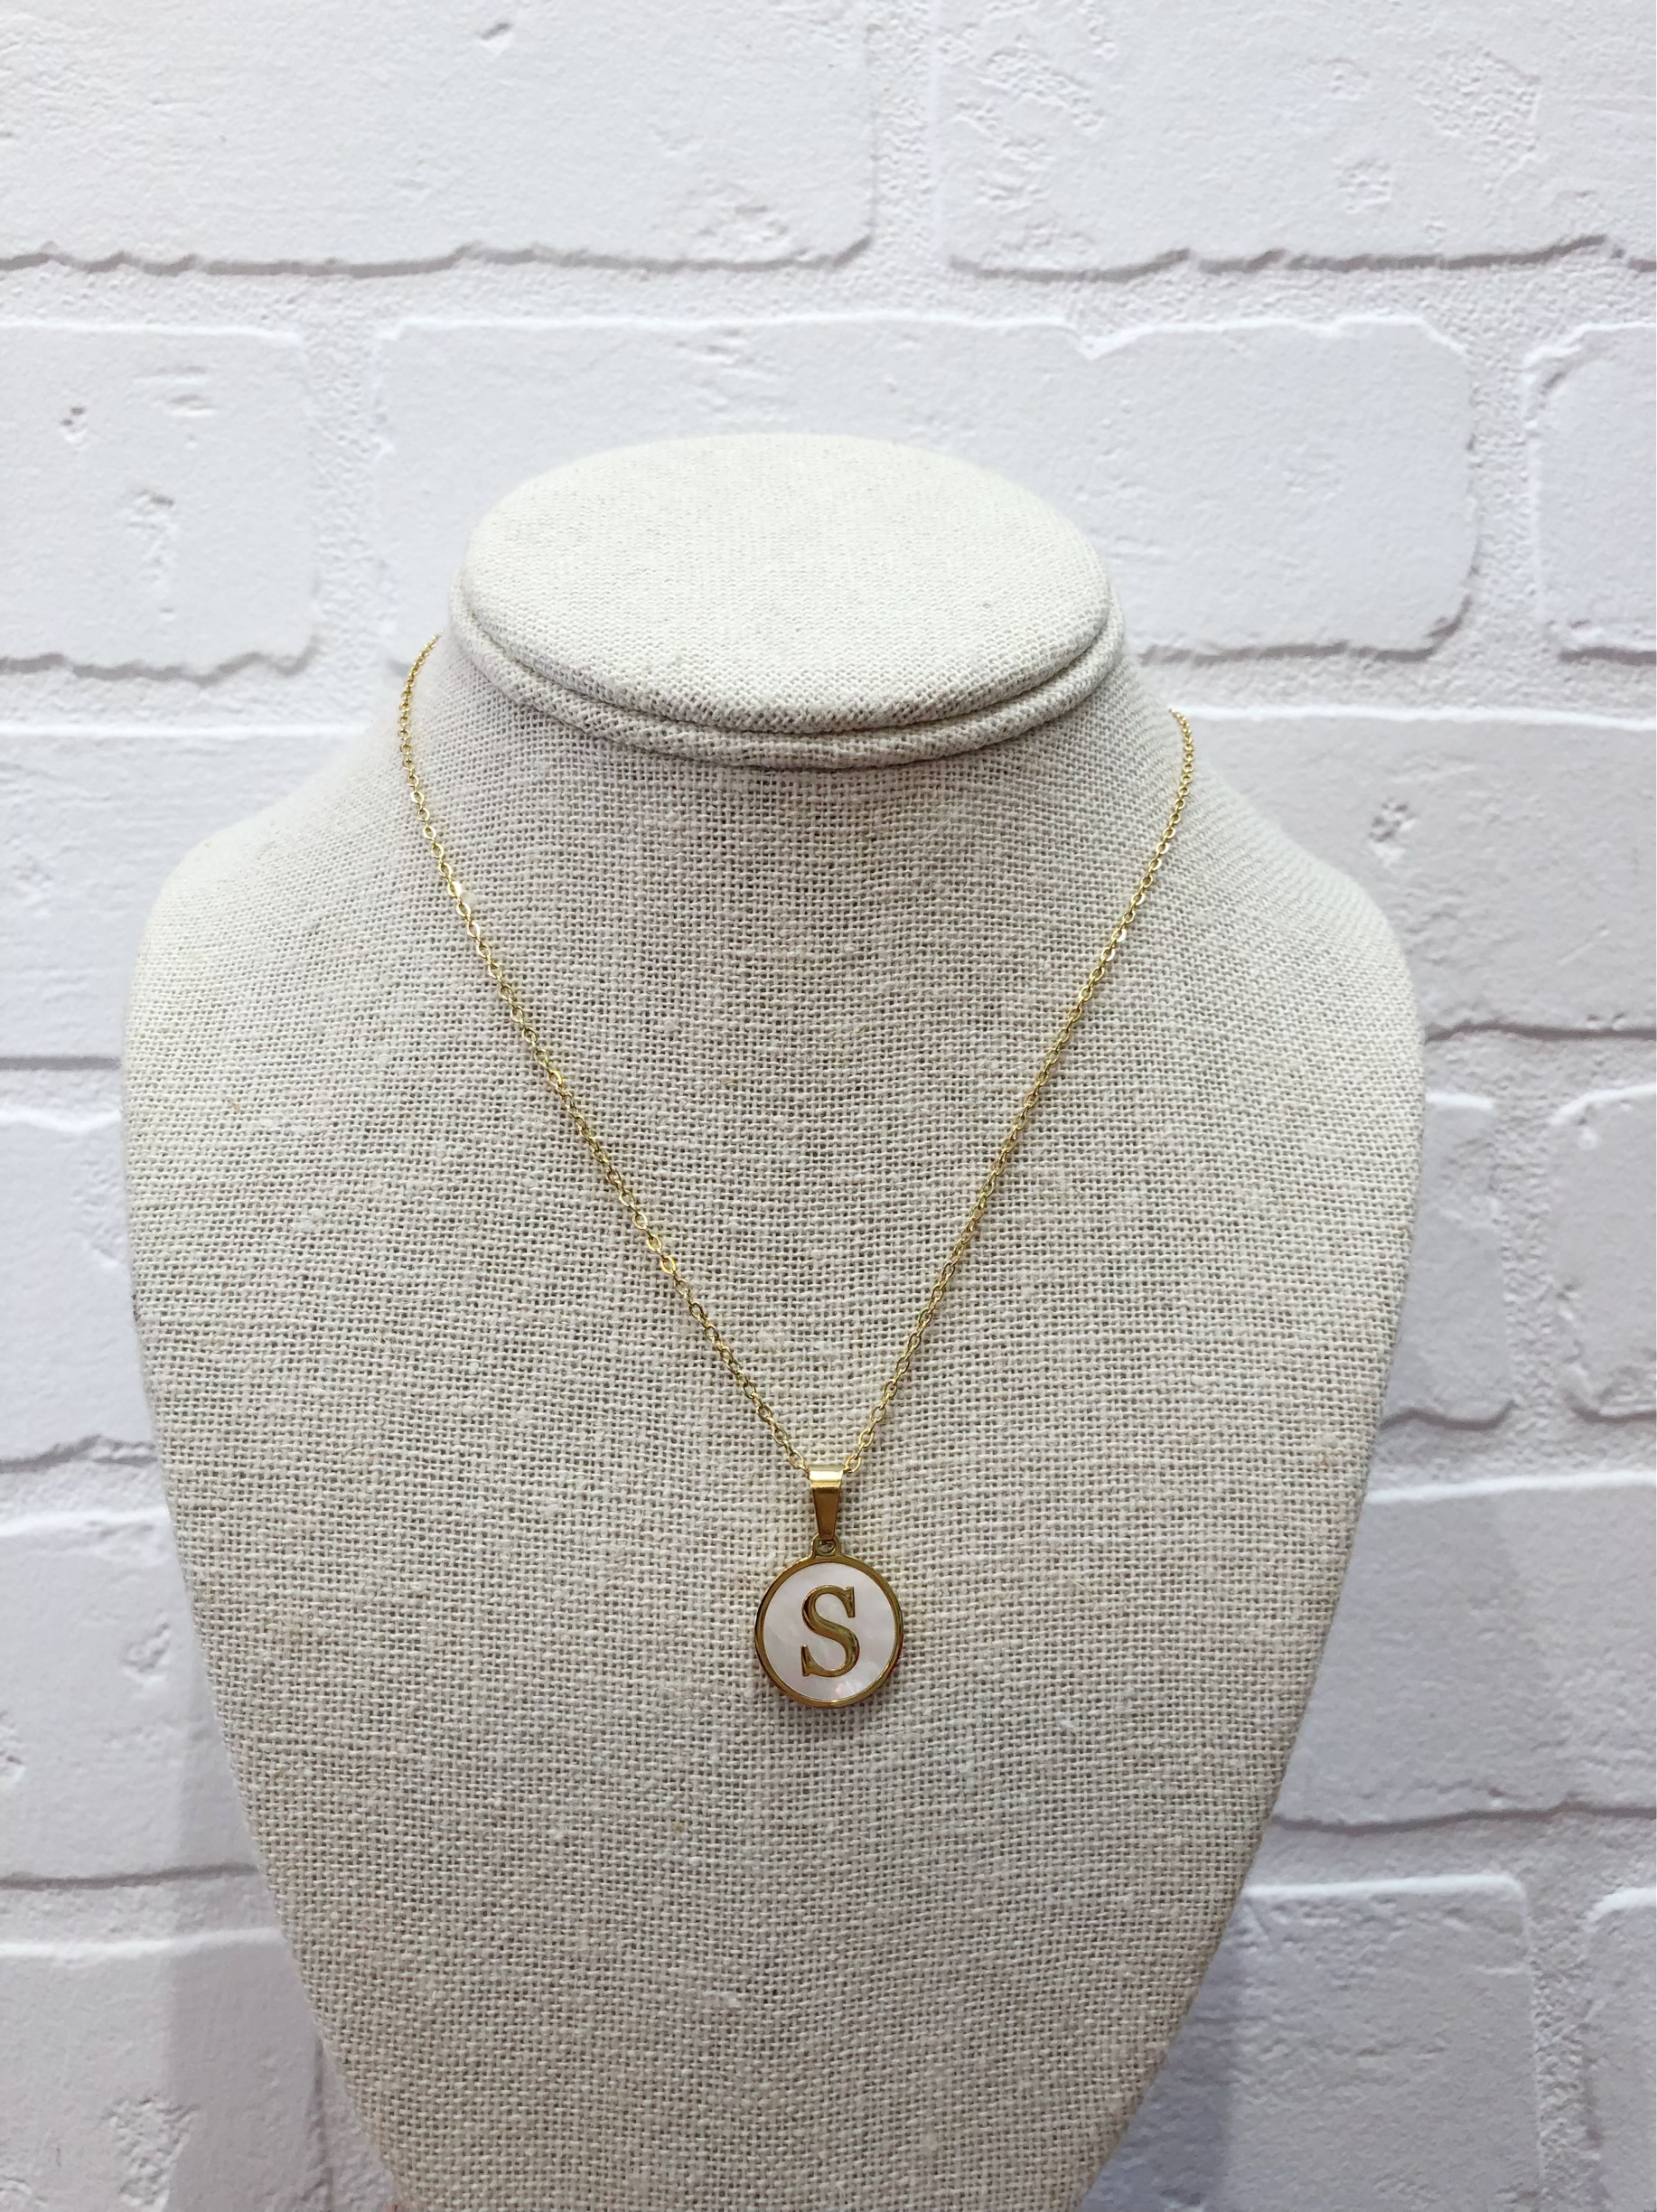 3S INITIAL NECKLACE